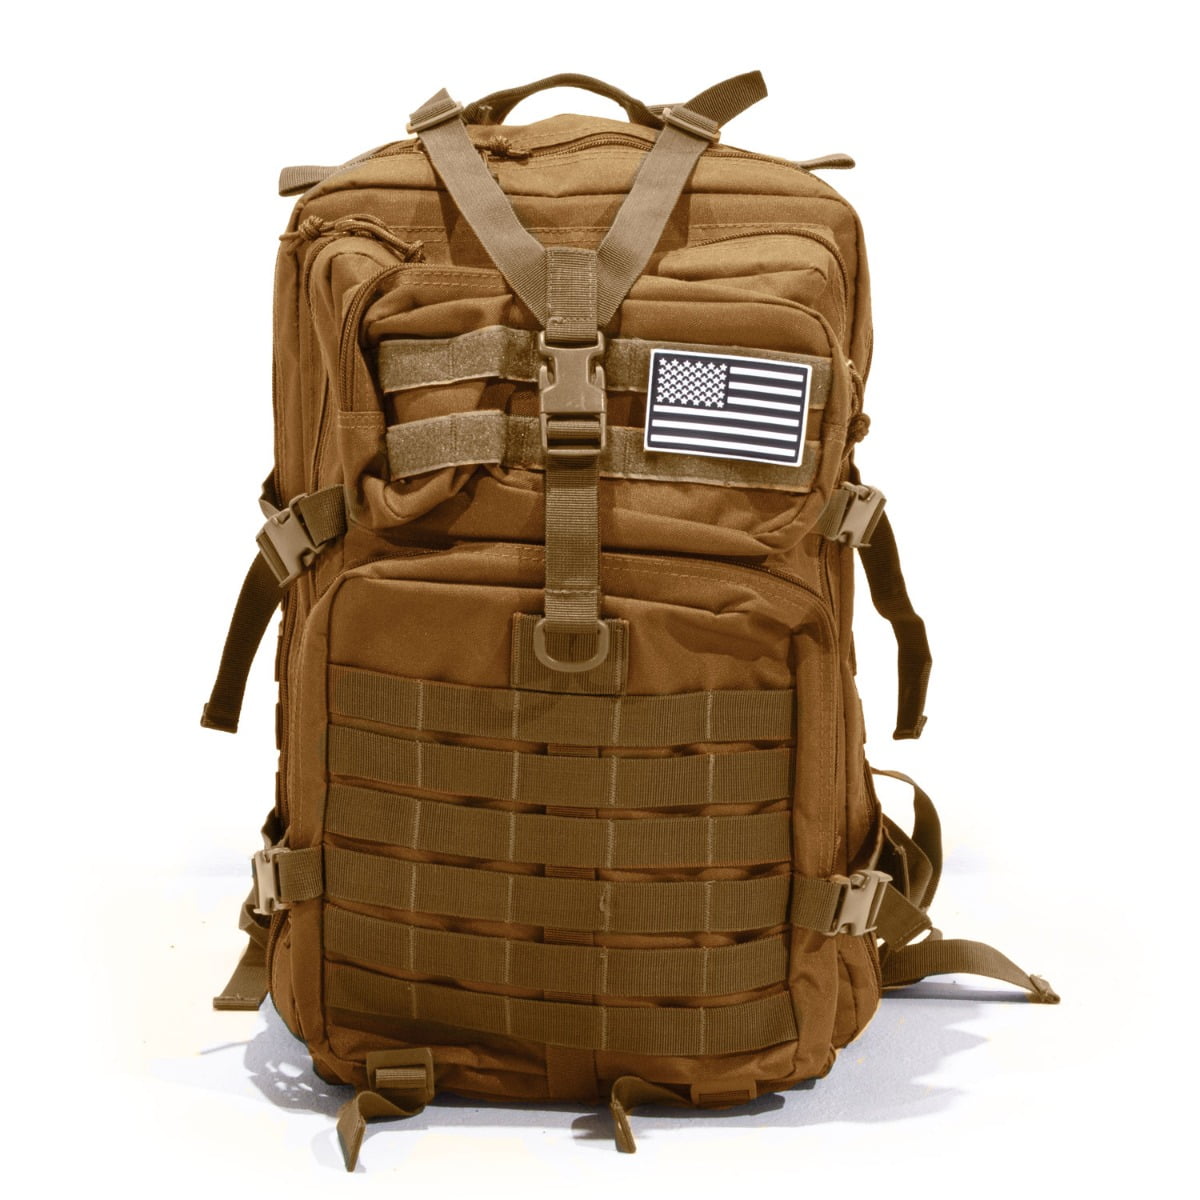 Moon Lence Military Tactical Backpack Assault Pack Travel Backpack for Camping,Hiking,Hunting 60L Molle Bag Rucksack 